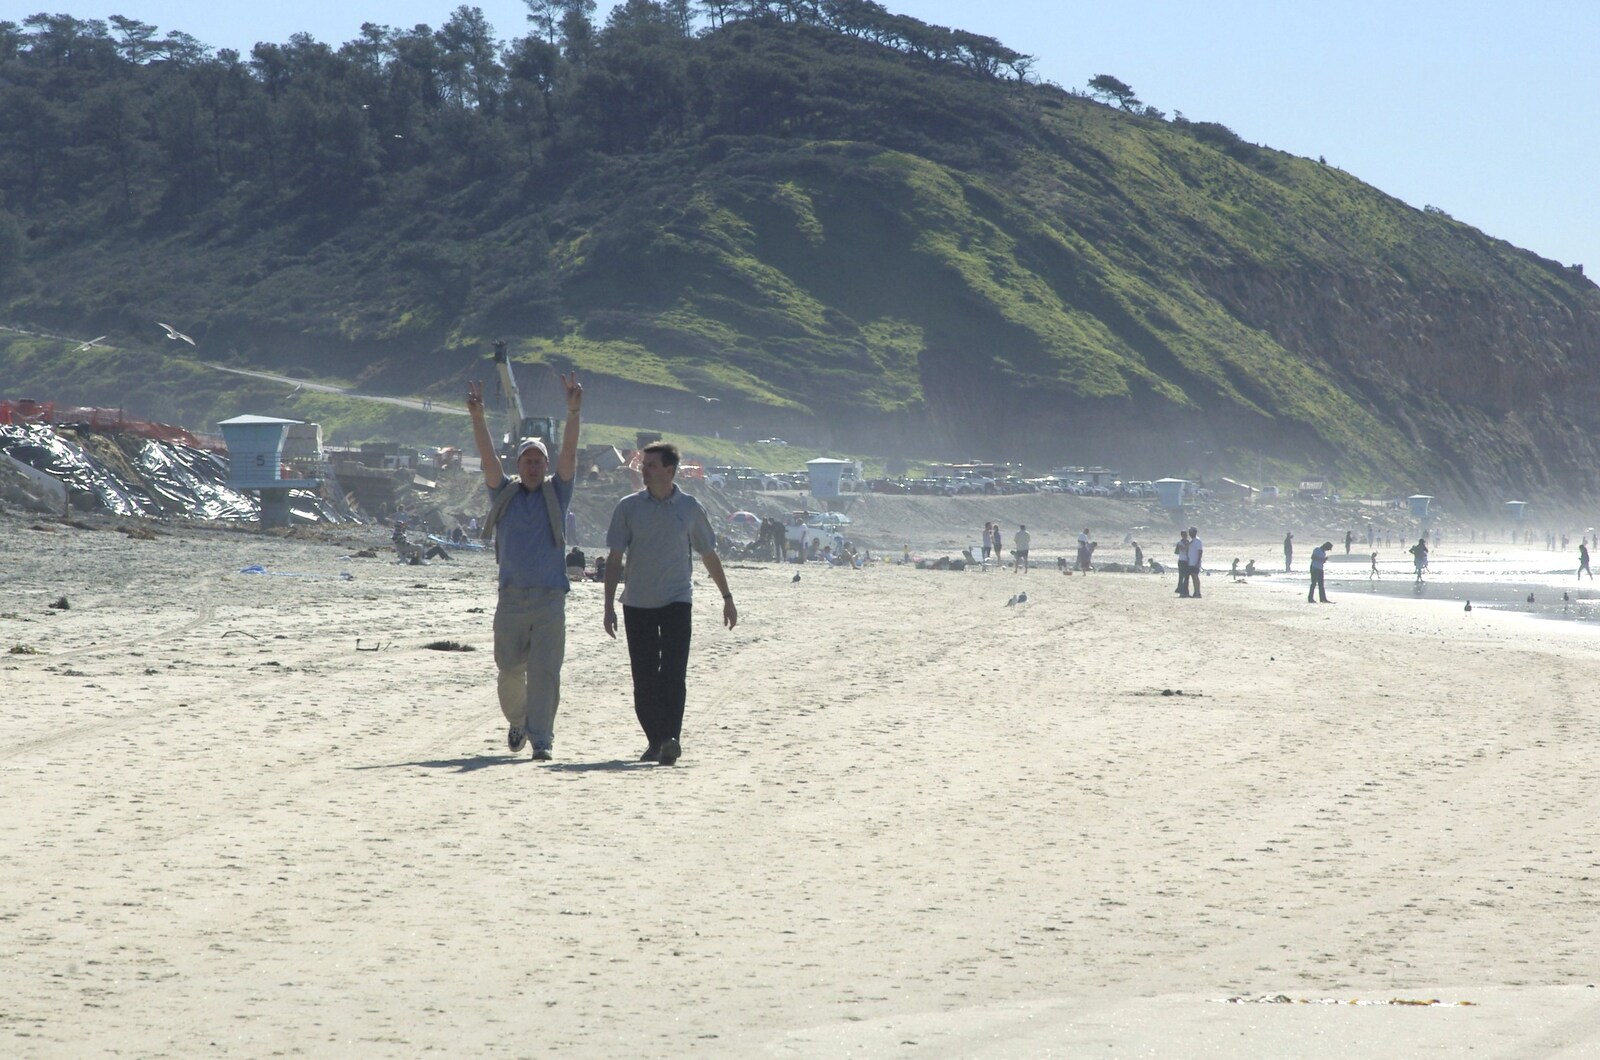 A Trip to San Diego, California, USA - 11th January 2005: Russell waves his arms around